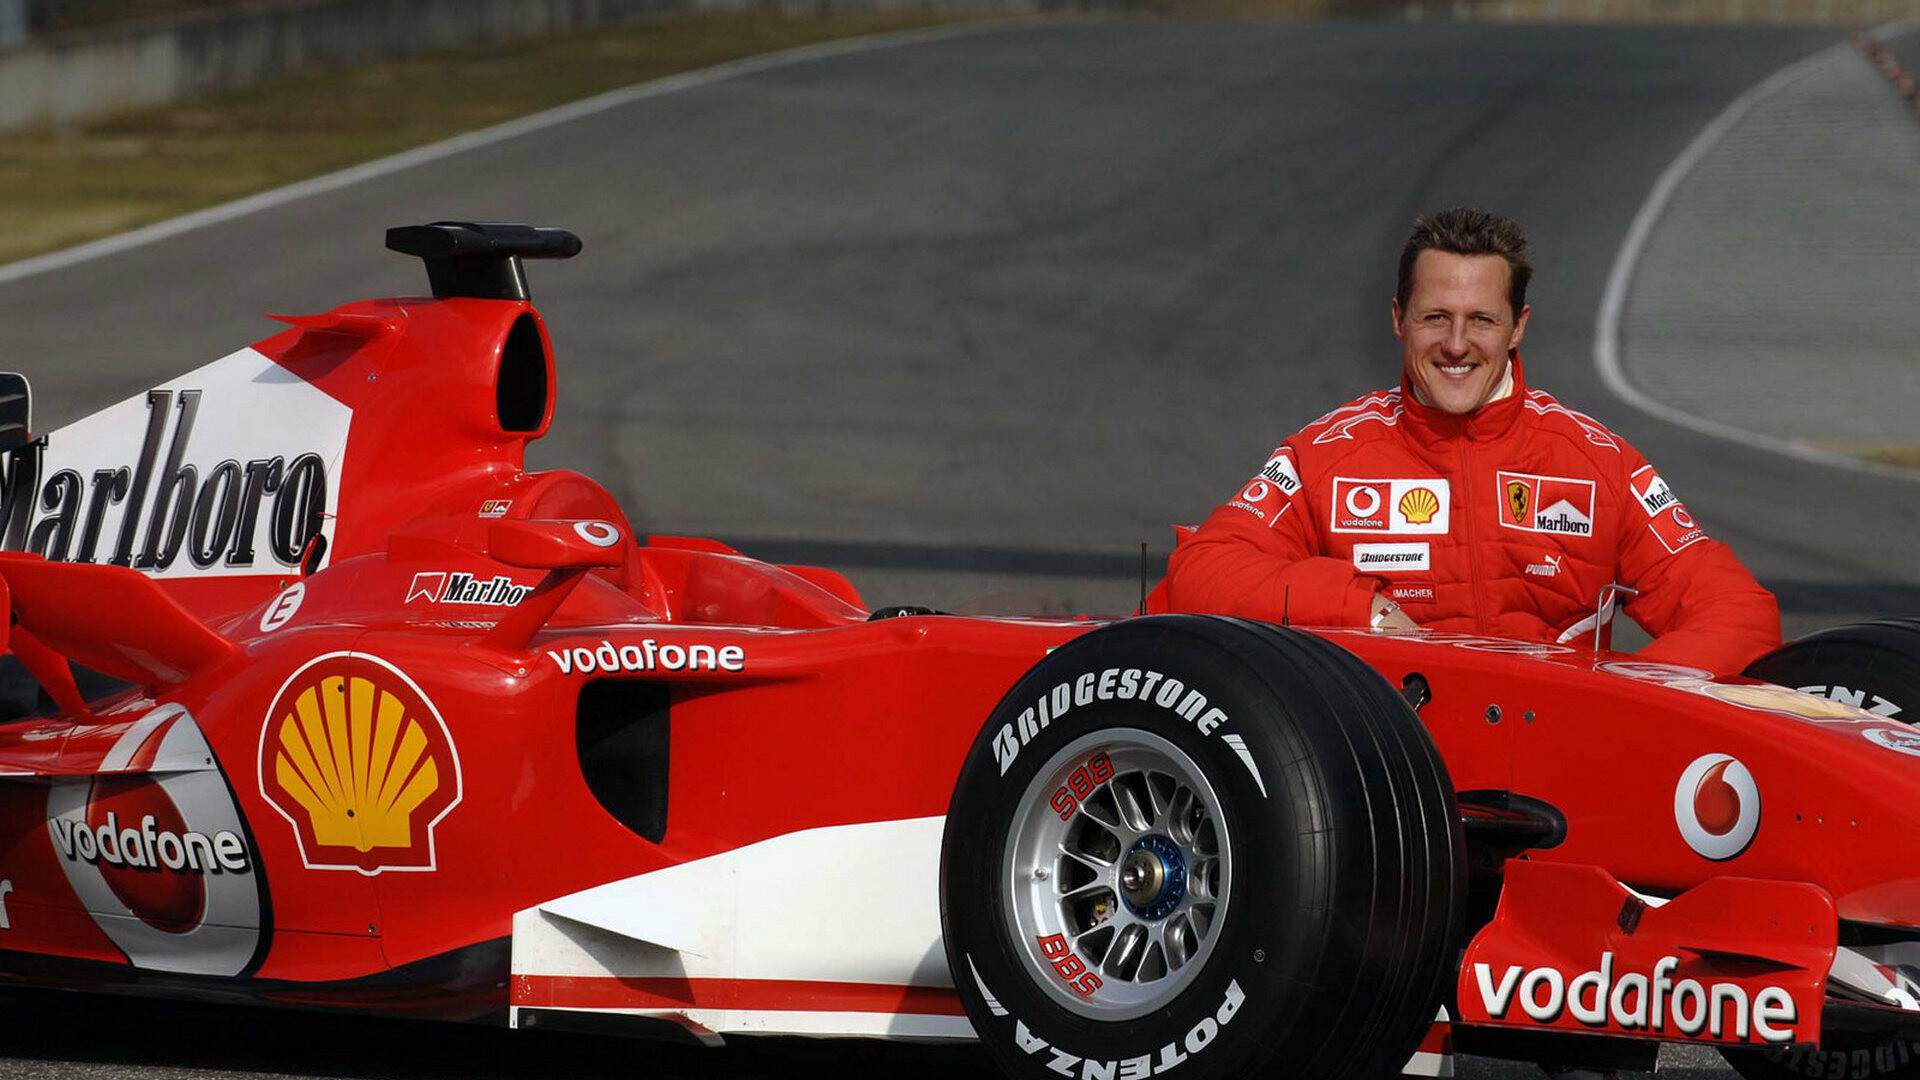 Michael Schumacher: He joined Scuderia Ferrari In 1996 and finished third in the Drivers' Championship in that year. 1920x1080 Full HD Background.